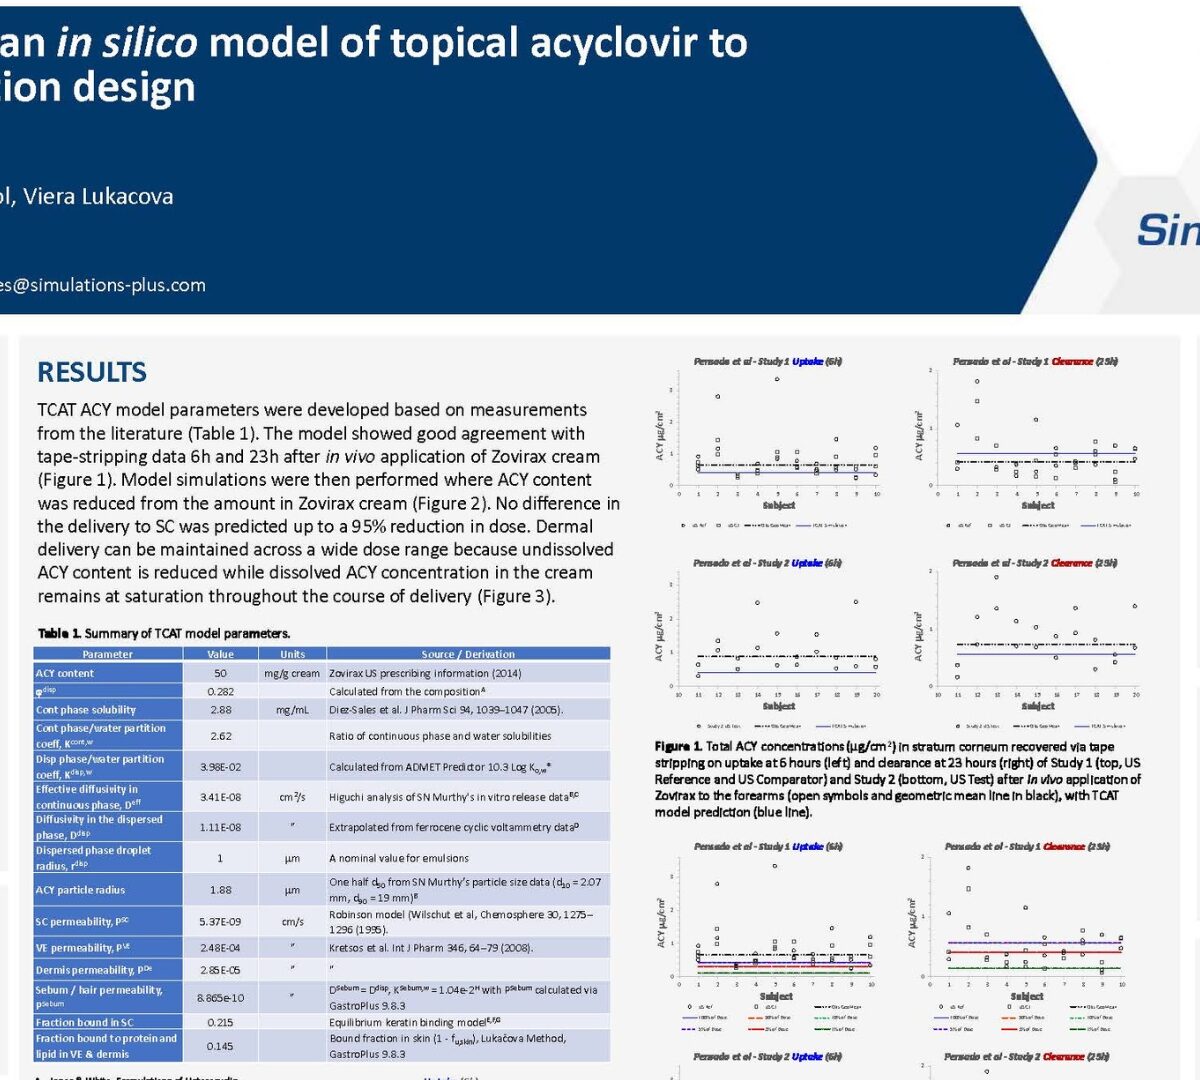 Development of an in silico model of topical acyclovir to explore formulation design